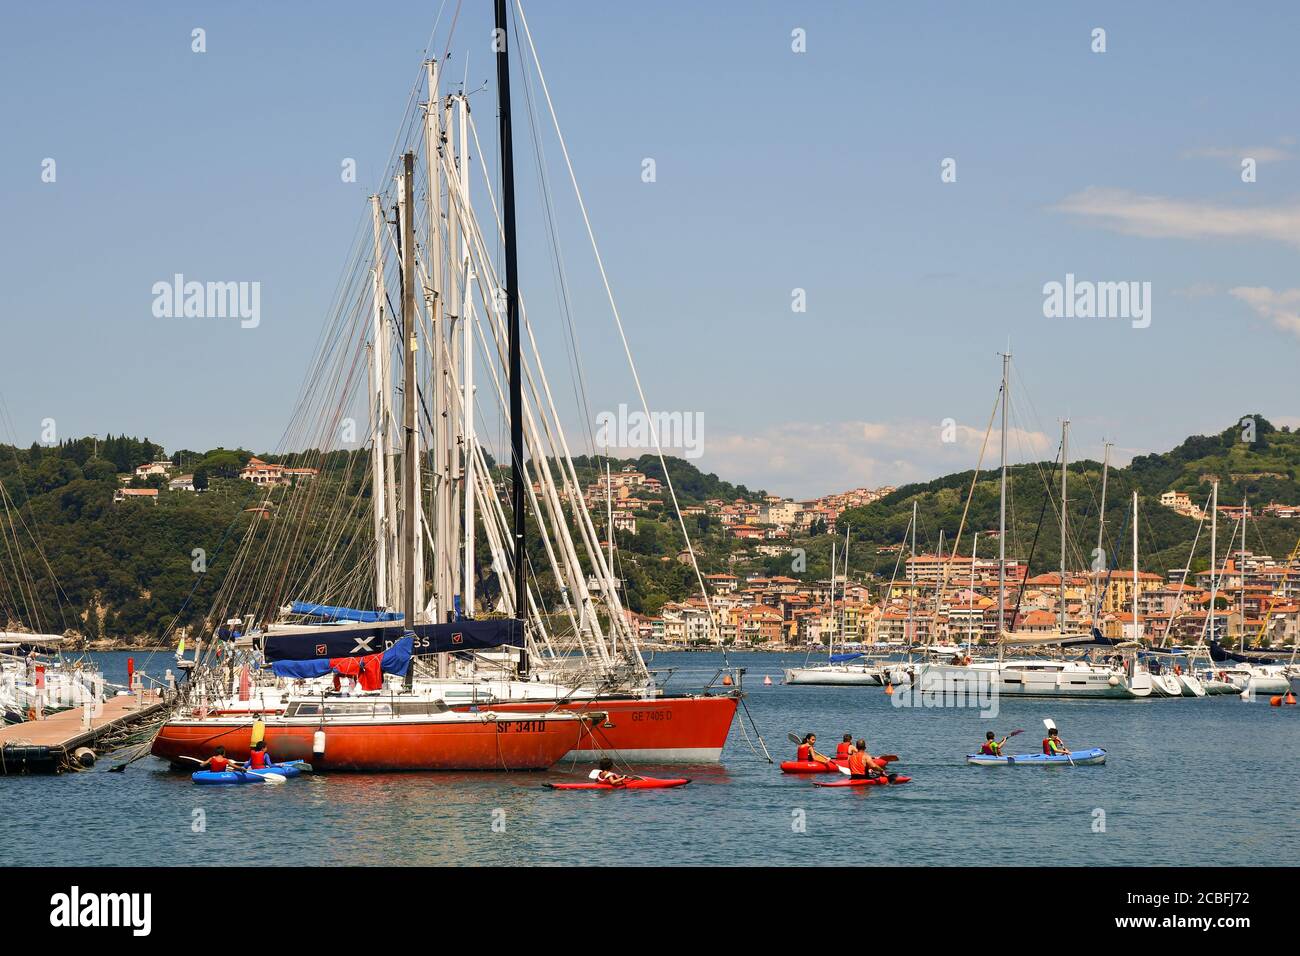 A group of young boys during a kayak lesson with an adult instructor in the harbor of the old sea town, Lerici, La Spezia, Liguria, Italy Stock Photo